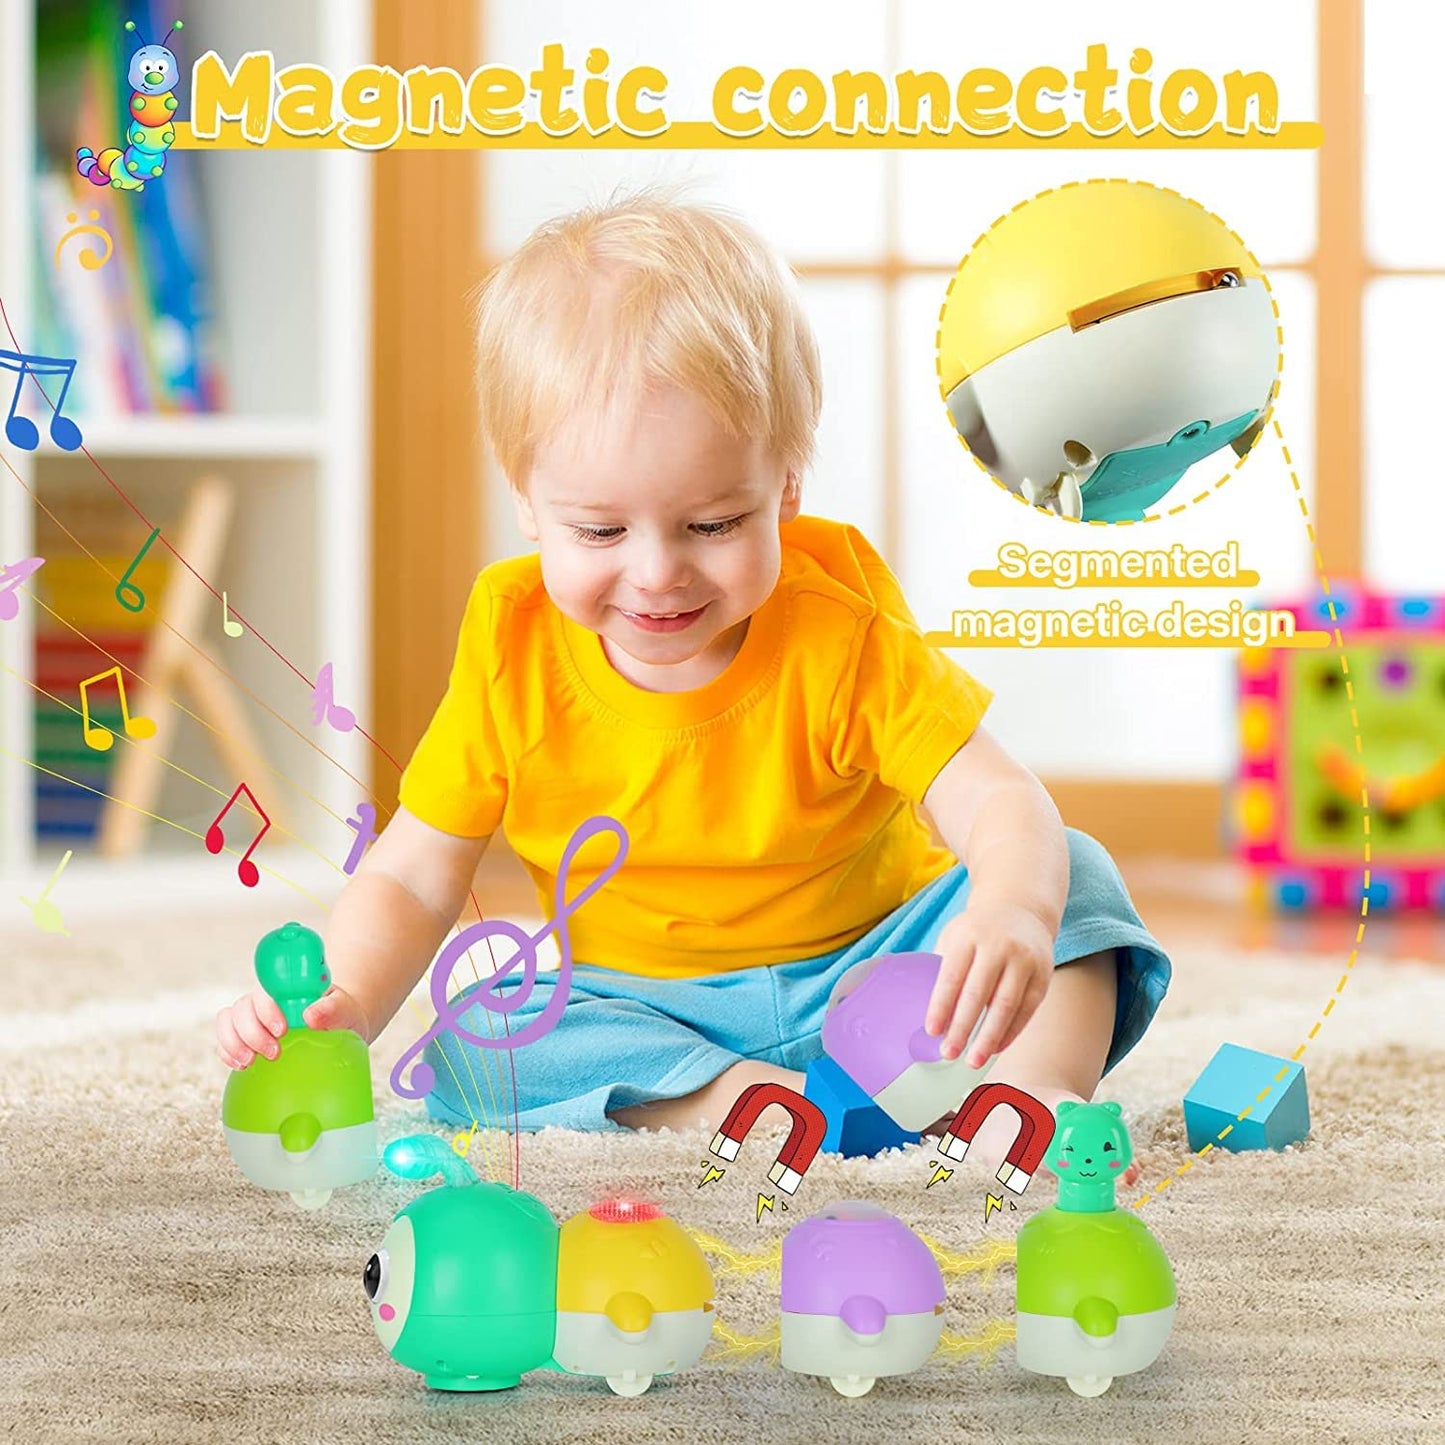 AM ANNA Baby Toys 0-6 Months, Crawling Caterpillar Tummy Time Toy with Magnetic Suction Music Light up, Sensory Learning Infant Toy for 6-12 Month Newborn Toddler 1 Year Old Girl Boy Baby Gifts